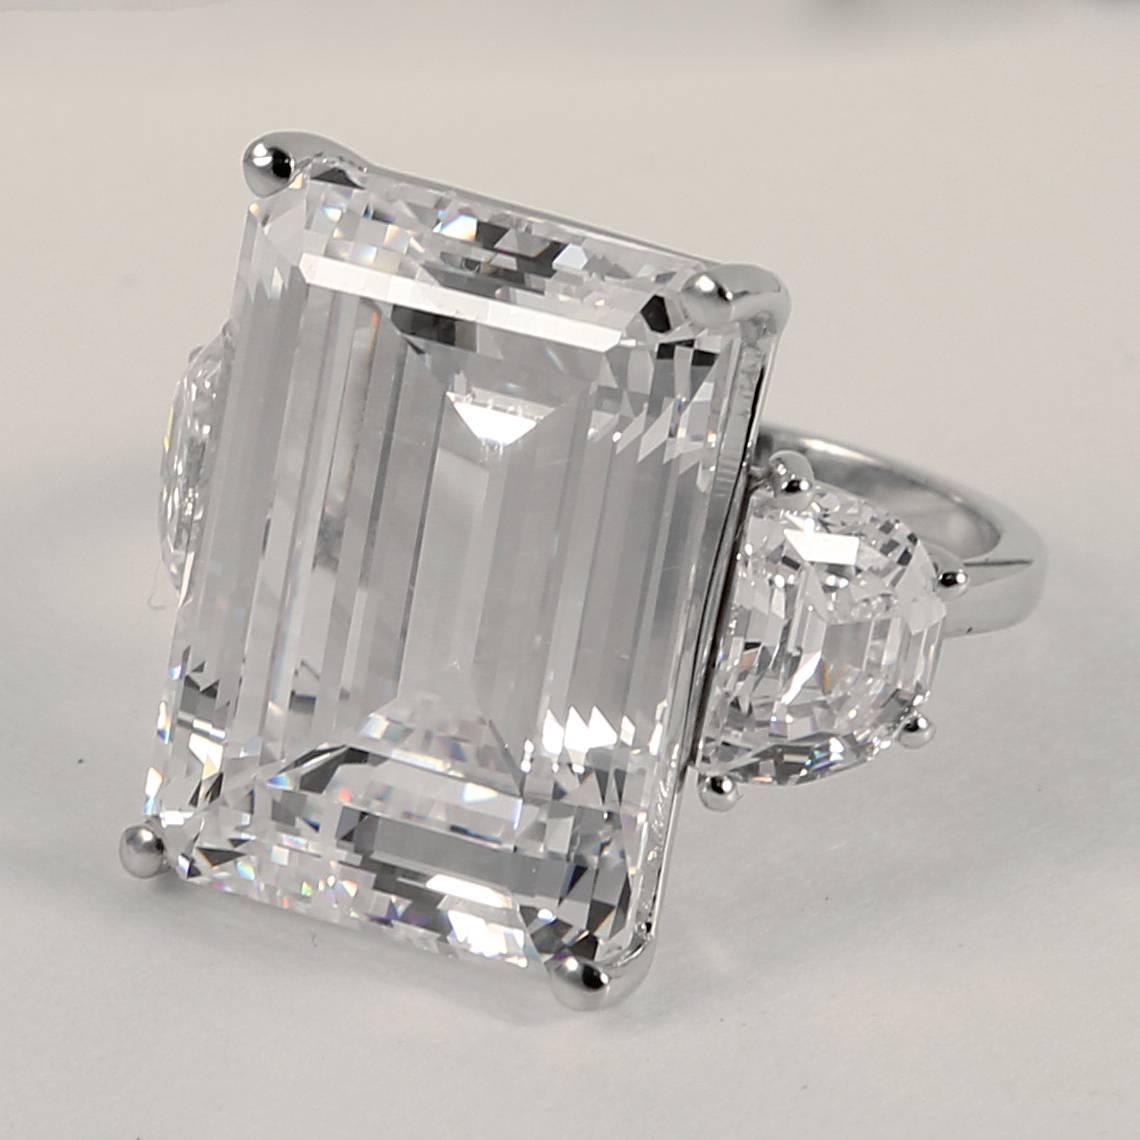 Magnificent faux 25 carat rectangular step cut diamond made of the finest hand  diamond-cut cubic zircon set with half moons either side in white gold. This ring has an amazing brilliance and fire. Measures 1inch long and 3/4inch wide.
Free sizing.